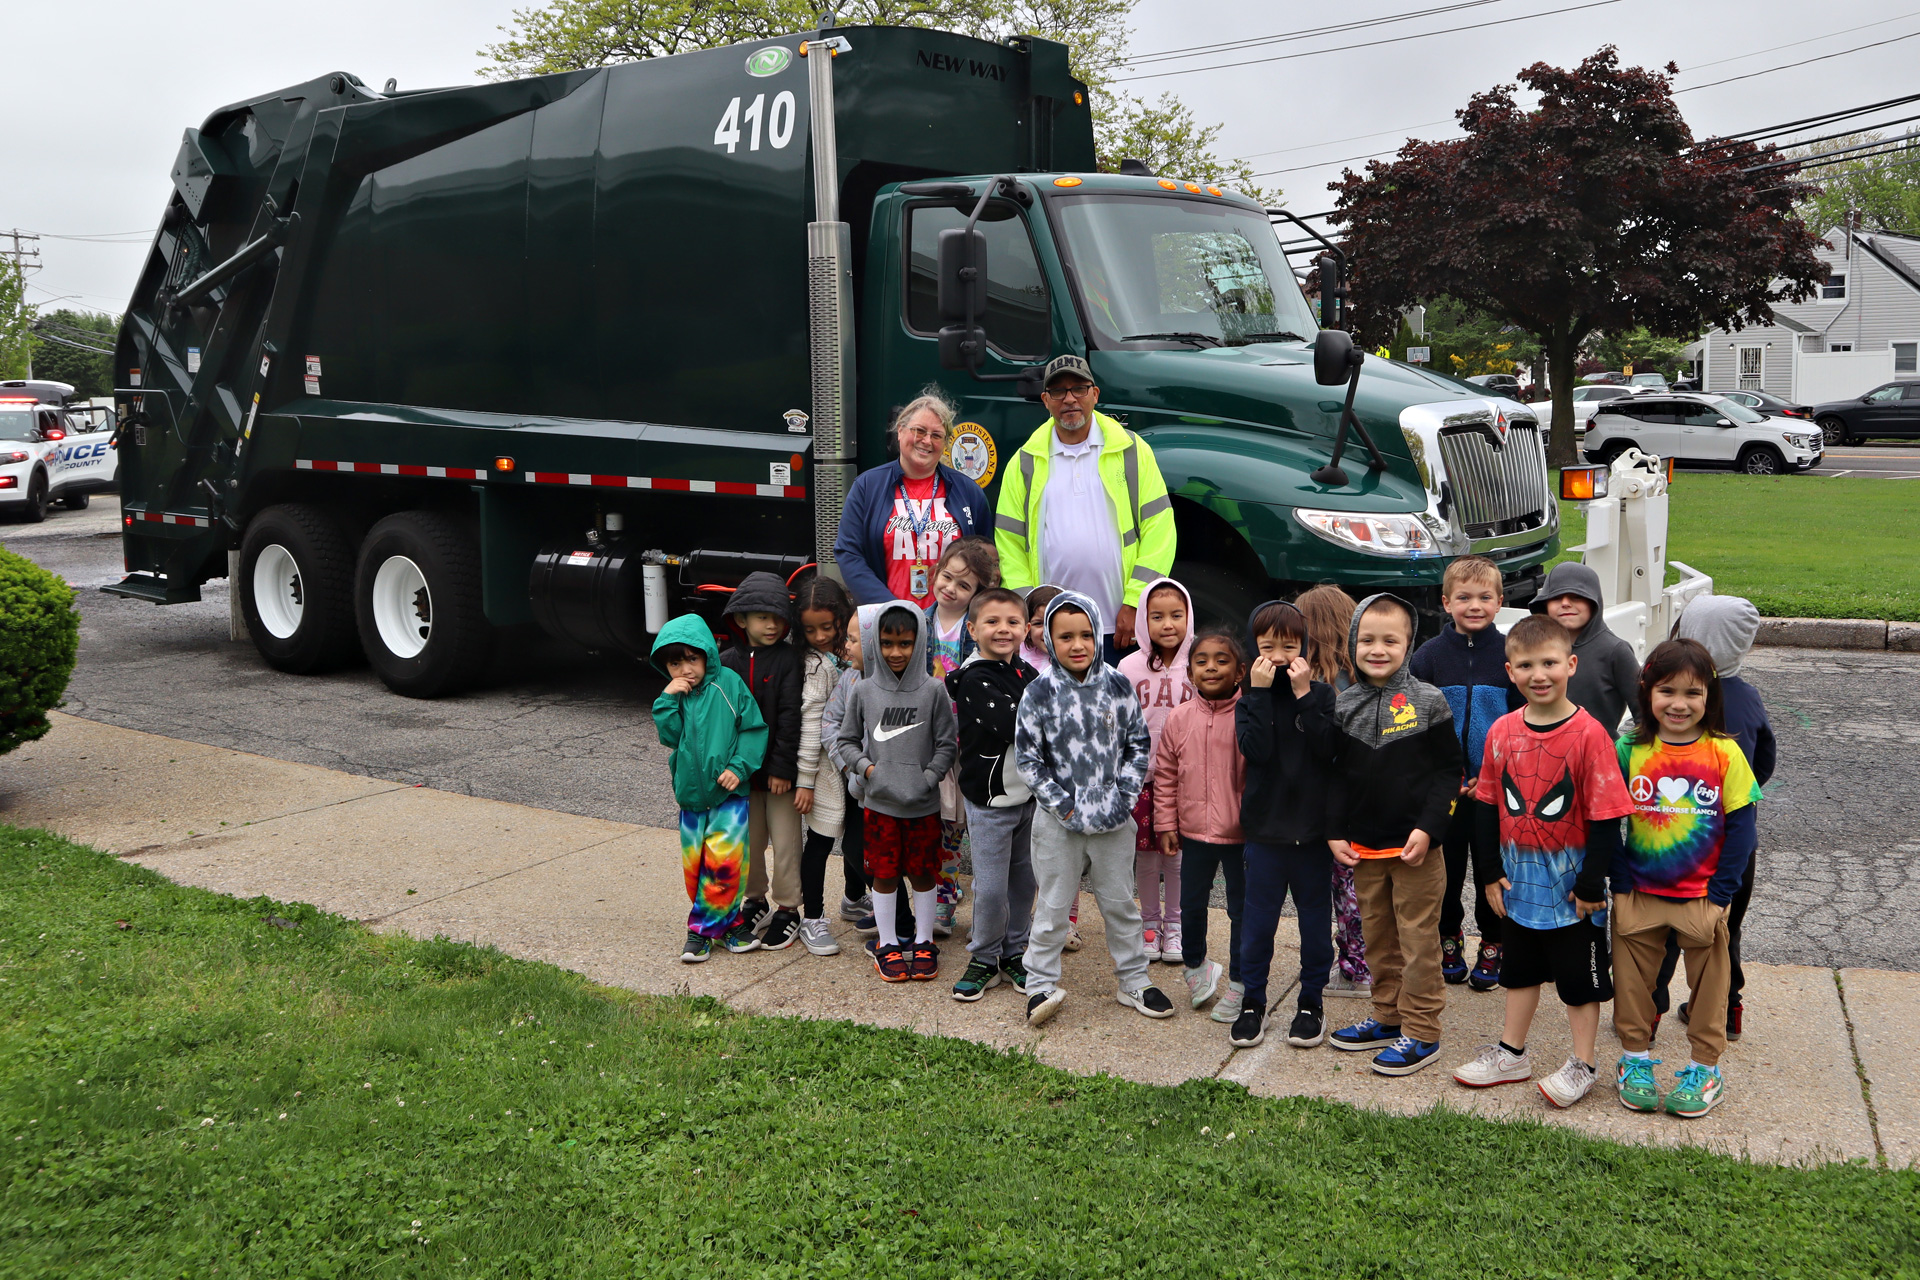 The Town of Hempstead sanitation department stopped by to show students a garbage truck.